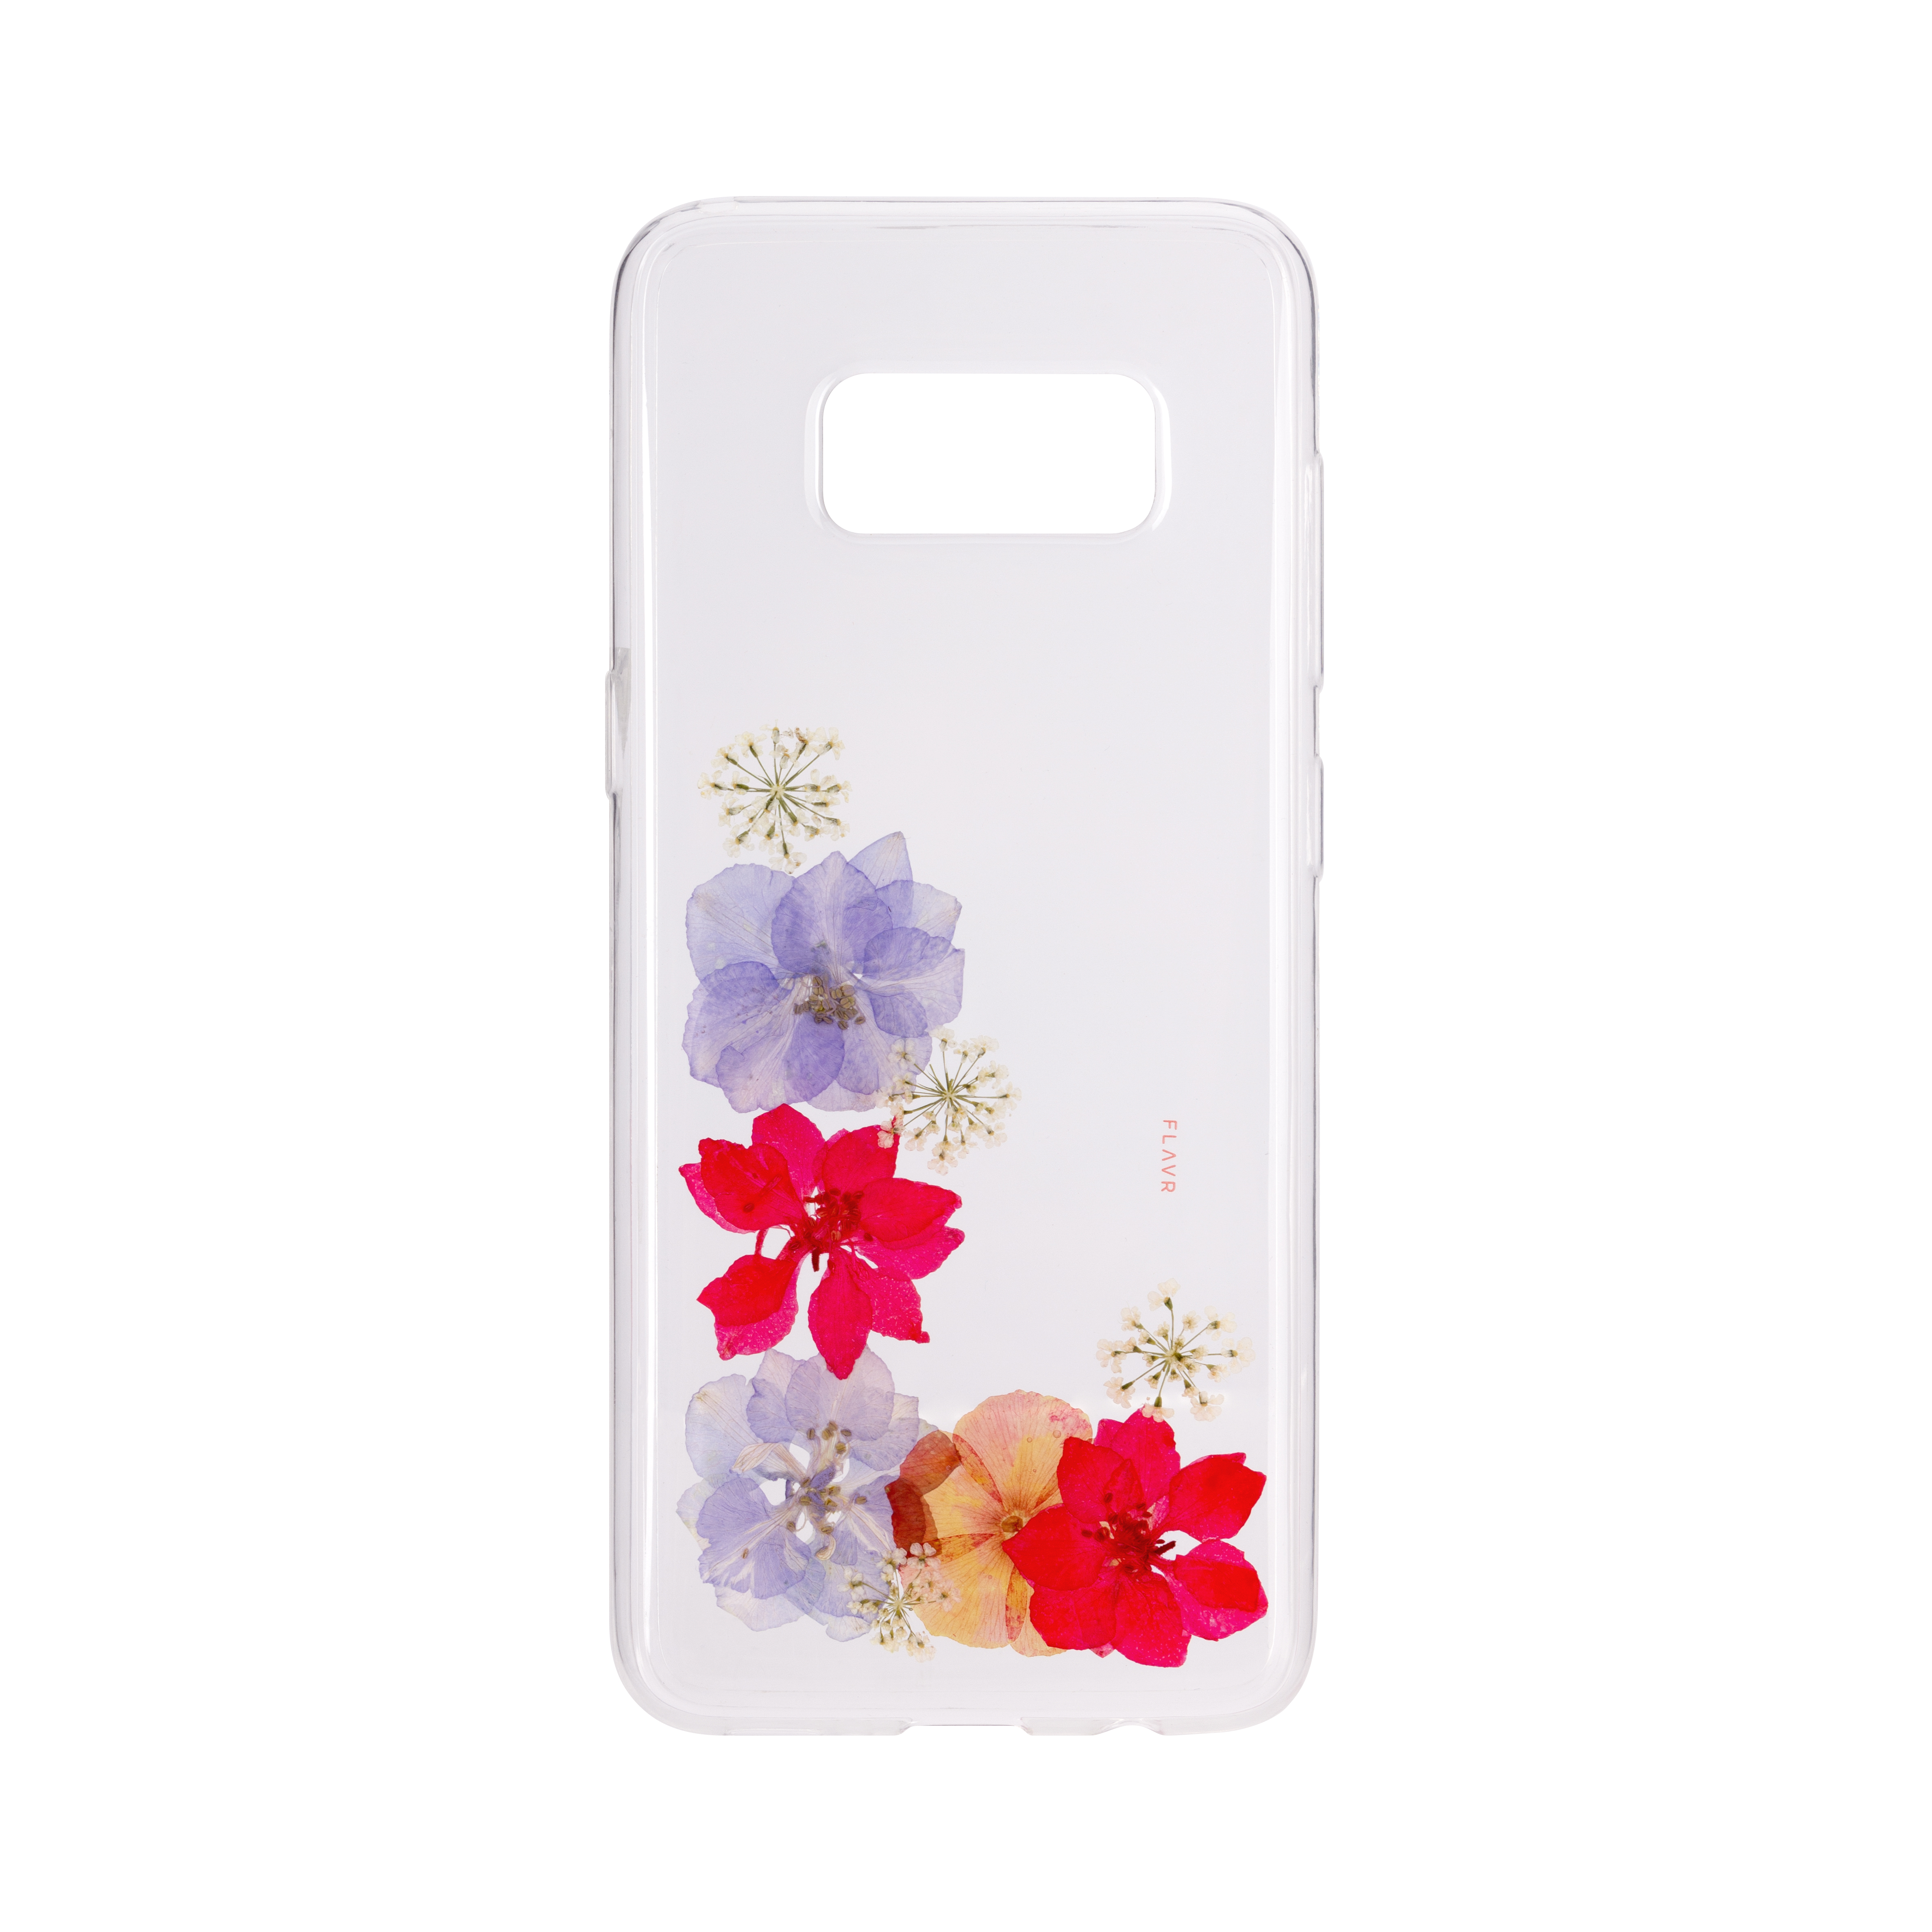 S8, COLOURFUL iPlate GALAXY Amelia, Real SAMSUNG, Backcover, FLAVR Flower